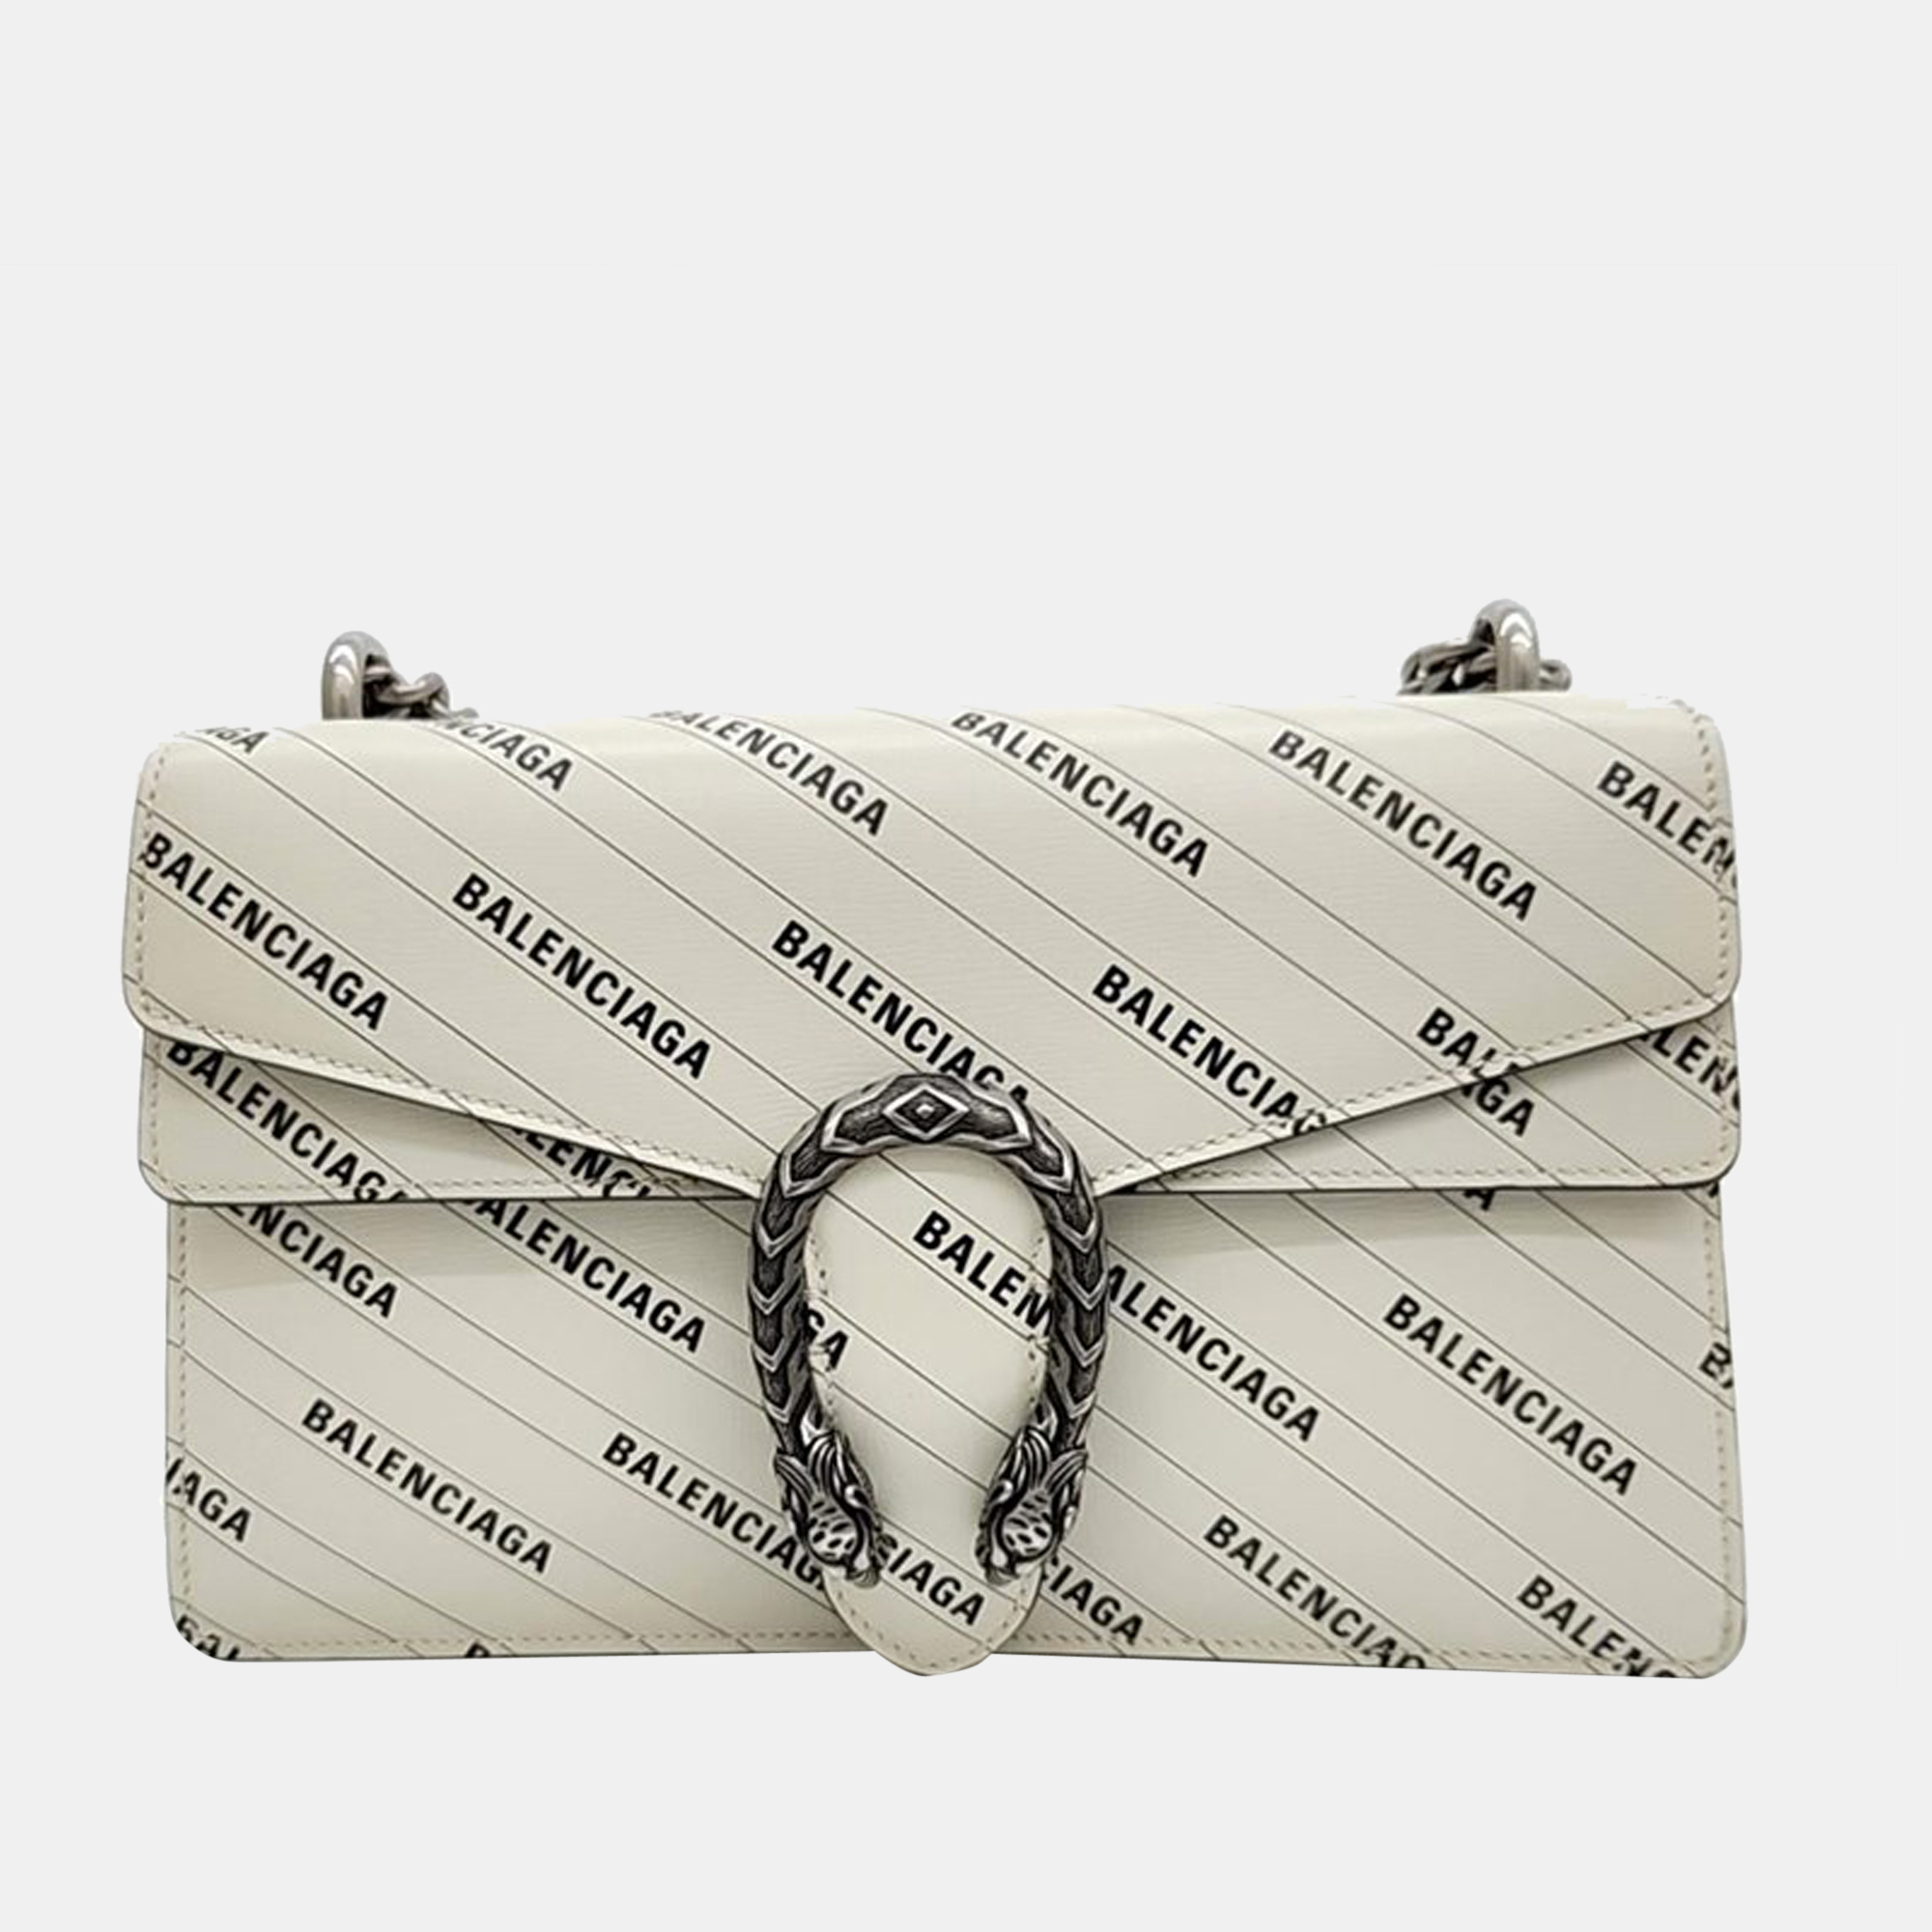 Gucci x balenciaga white leather the hacker project  dionysus bag